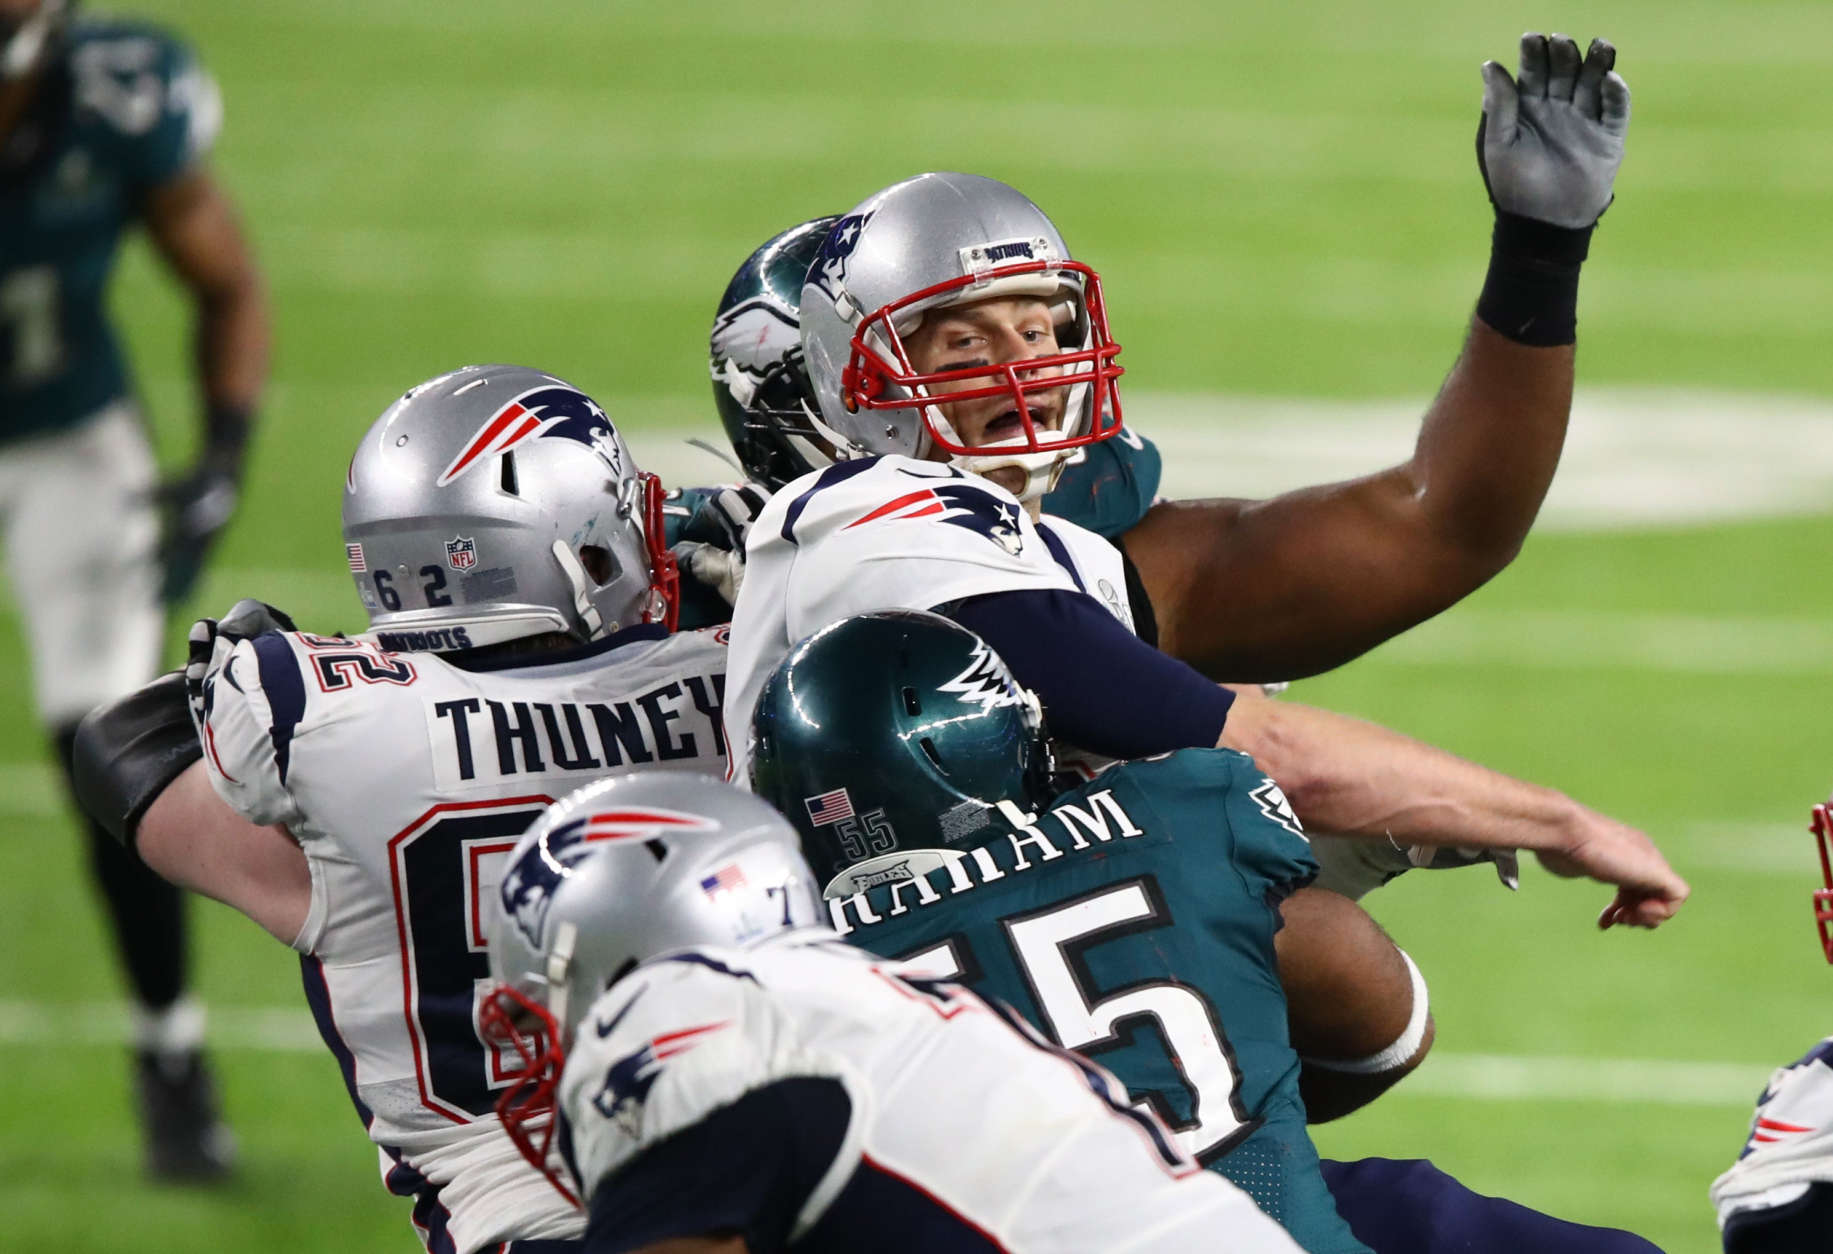 MINNEAPOLIS, MN - FEBRUARY 04: Brandon Graham #55 of the Philadelphia Eagles forces a fumble against Tom Brady #12 of the New England Patriots during the fourth quarter in Super Bowl LII at U.S. Bank Stadium on February 4, 2018 in Minneapolis, Minnesota.  (Photo by Gregory Shamus/Getty Images)